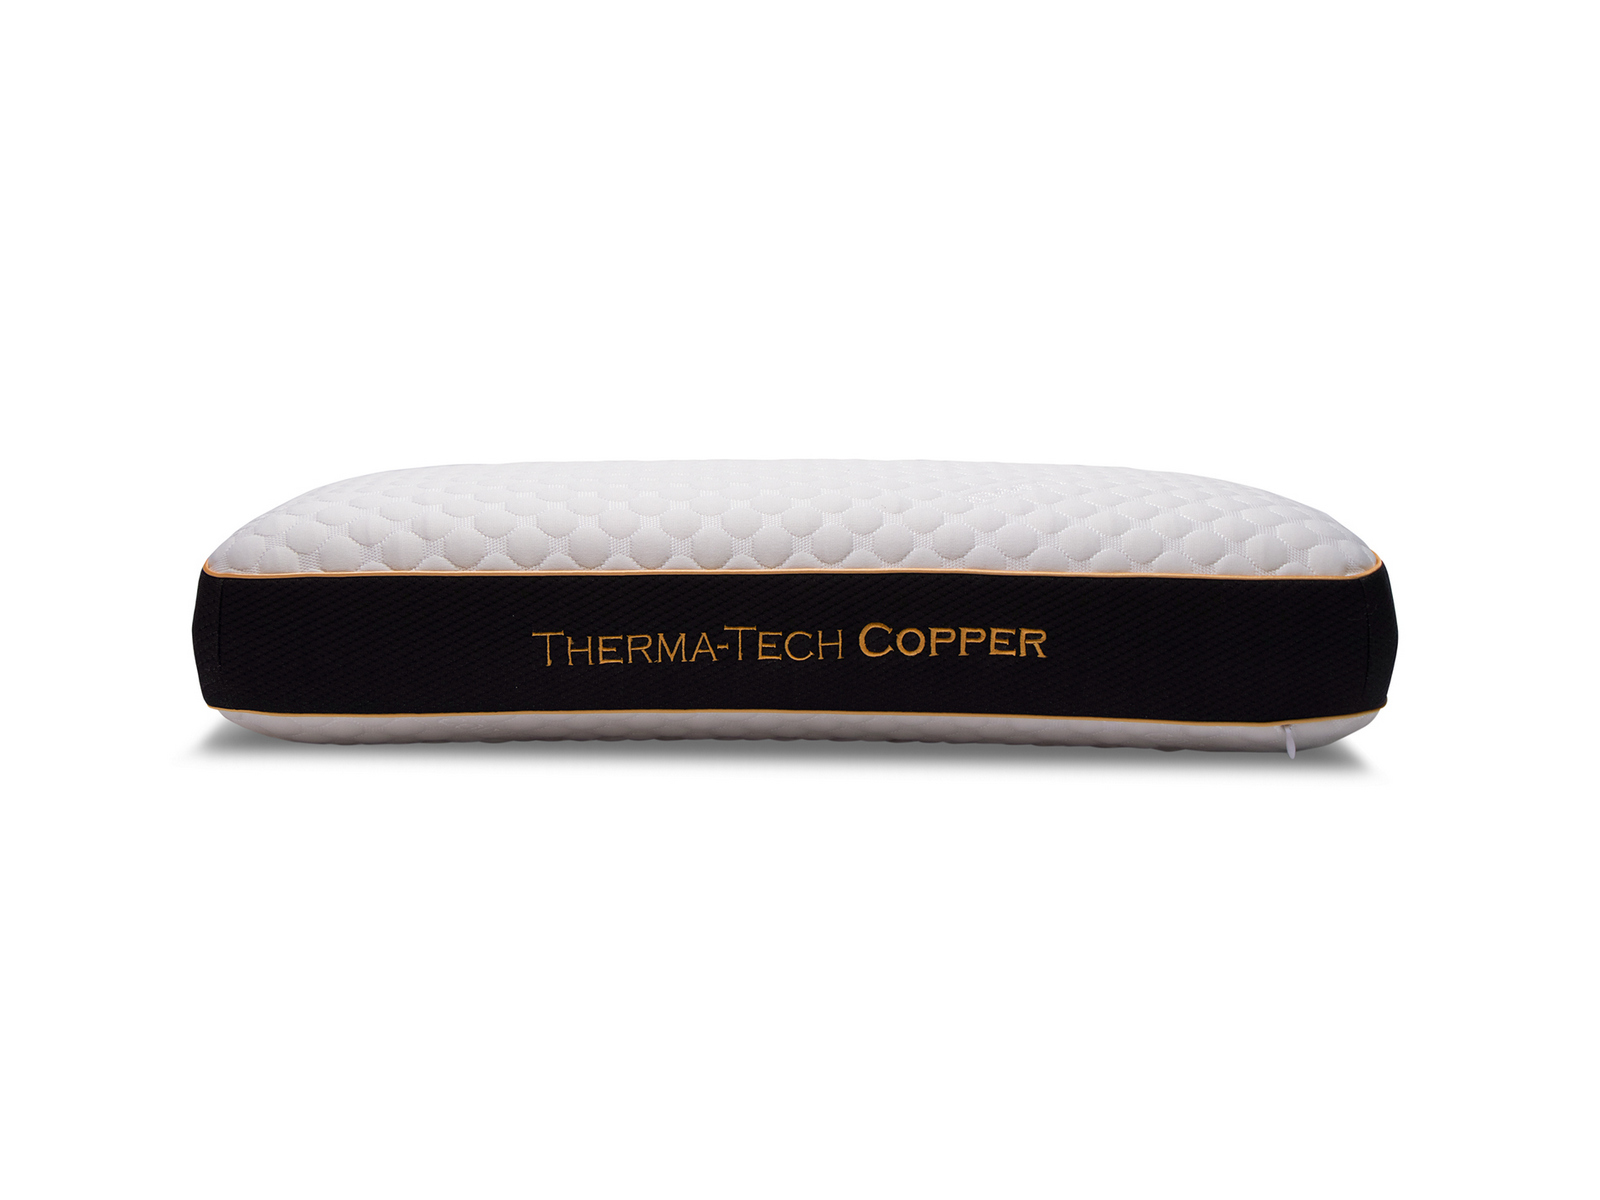 Healthy Sleep Queen Therma-Tech Copper Pillow | 4.5 Low Profile